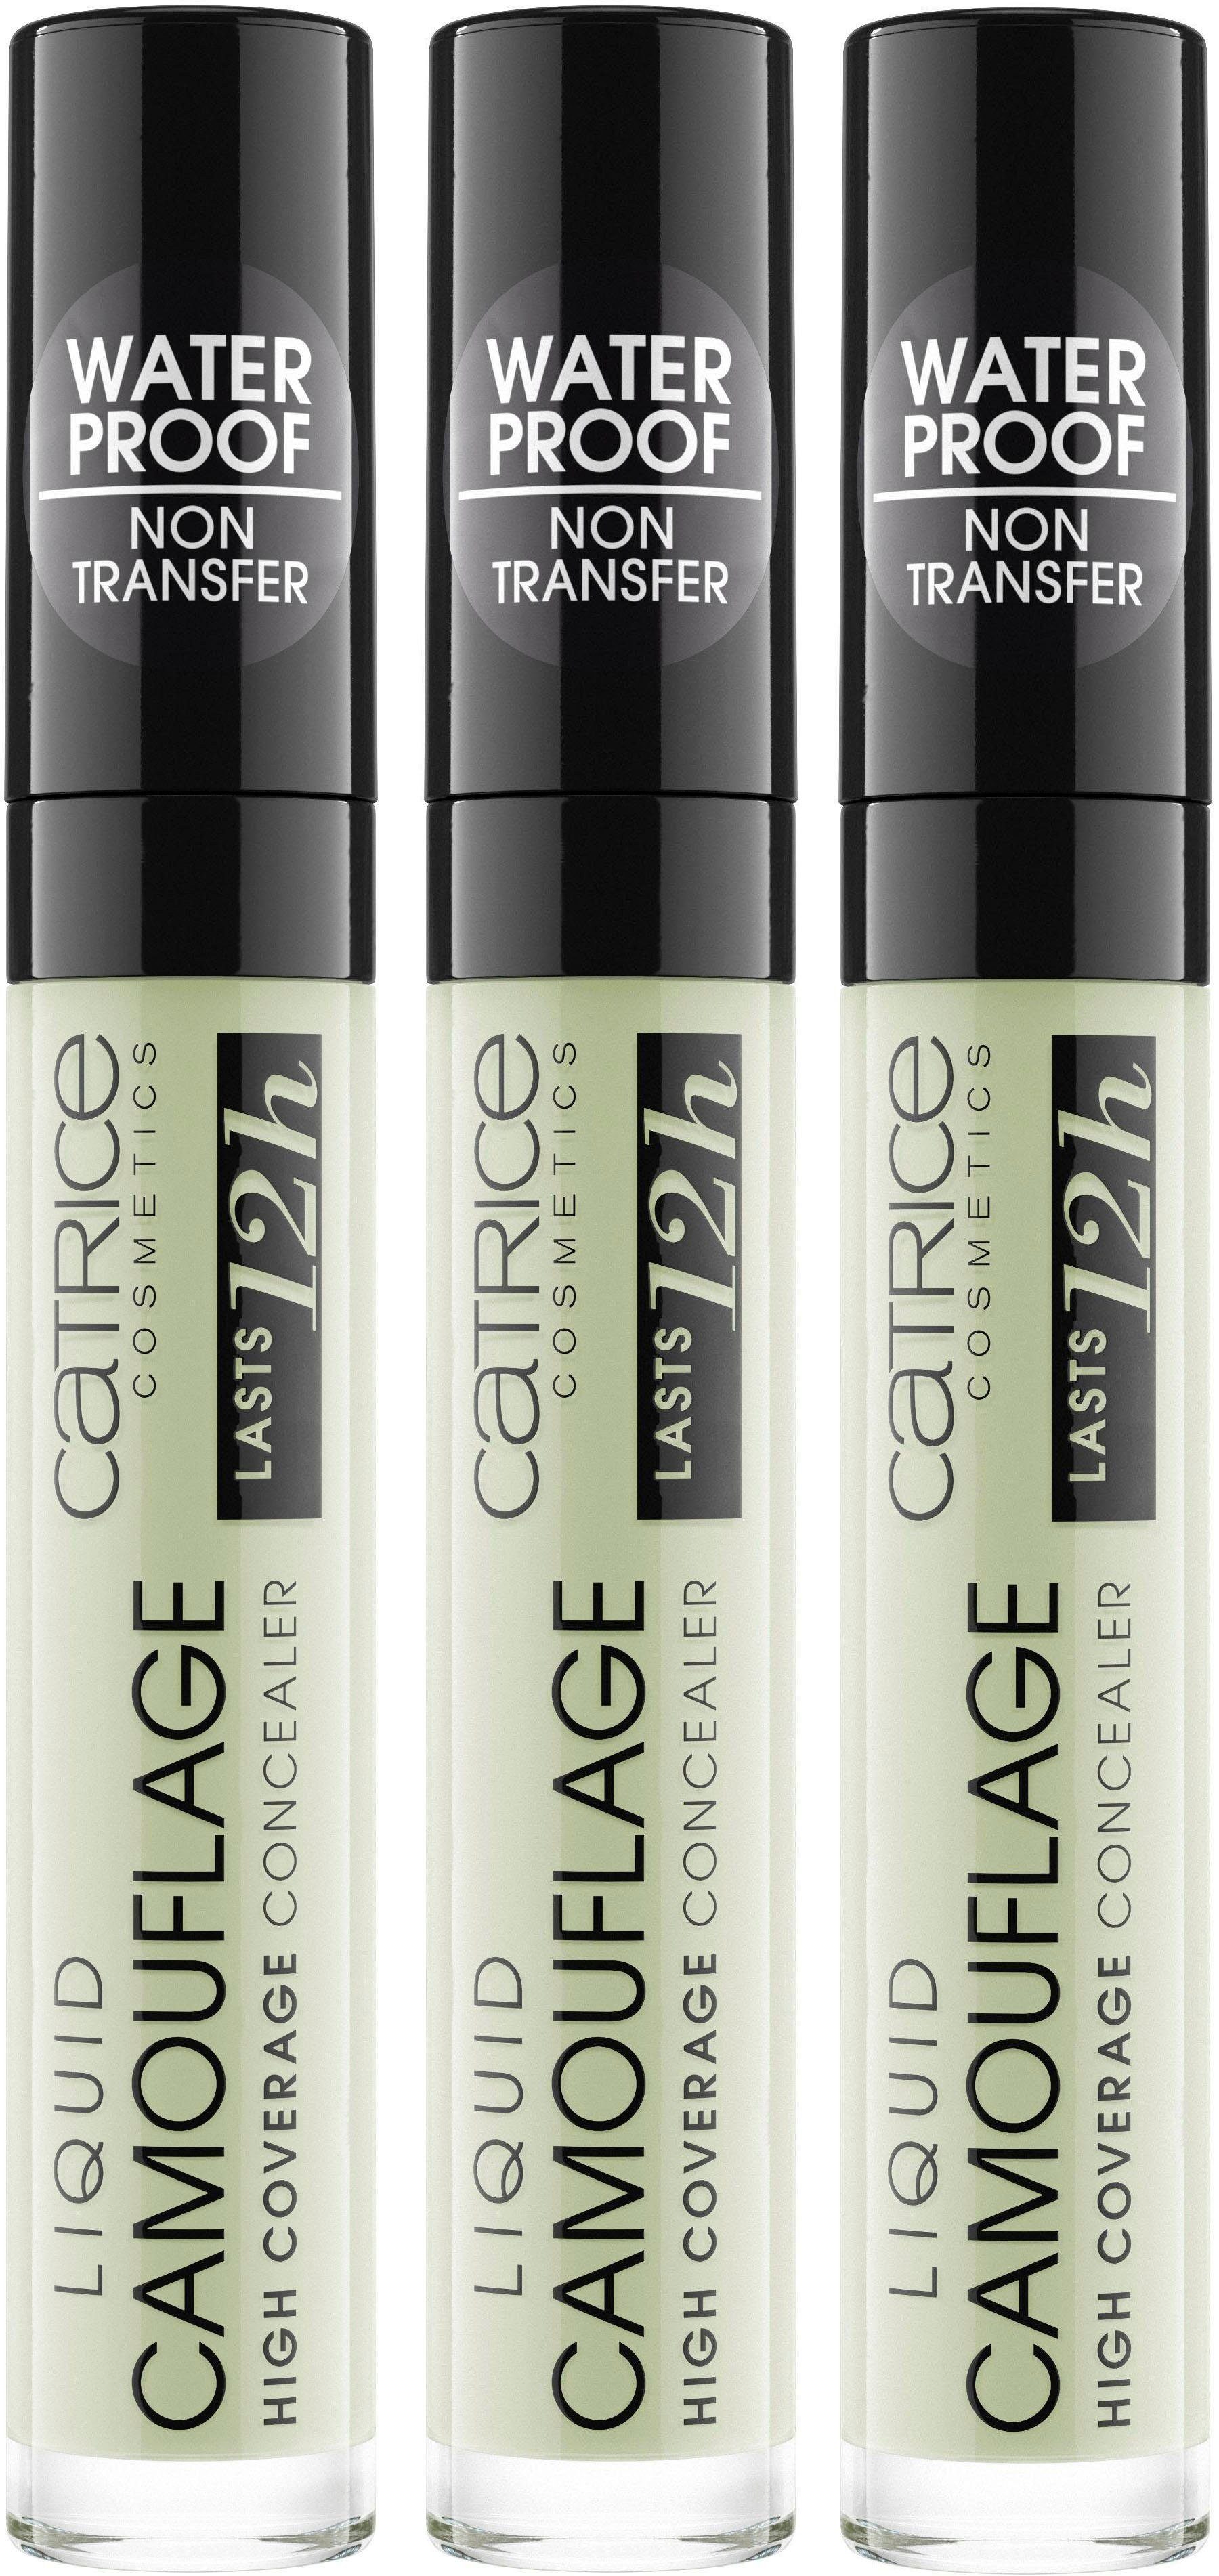 Anti-Red Liquid Coverage, 3er Catrice Pack Camouflage Concealer High 200